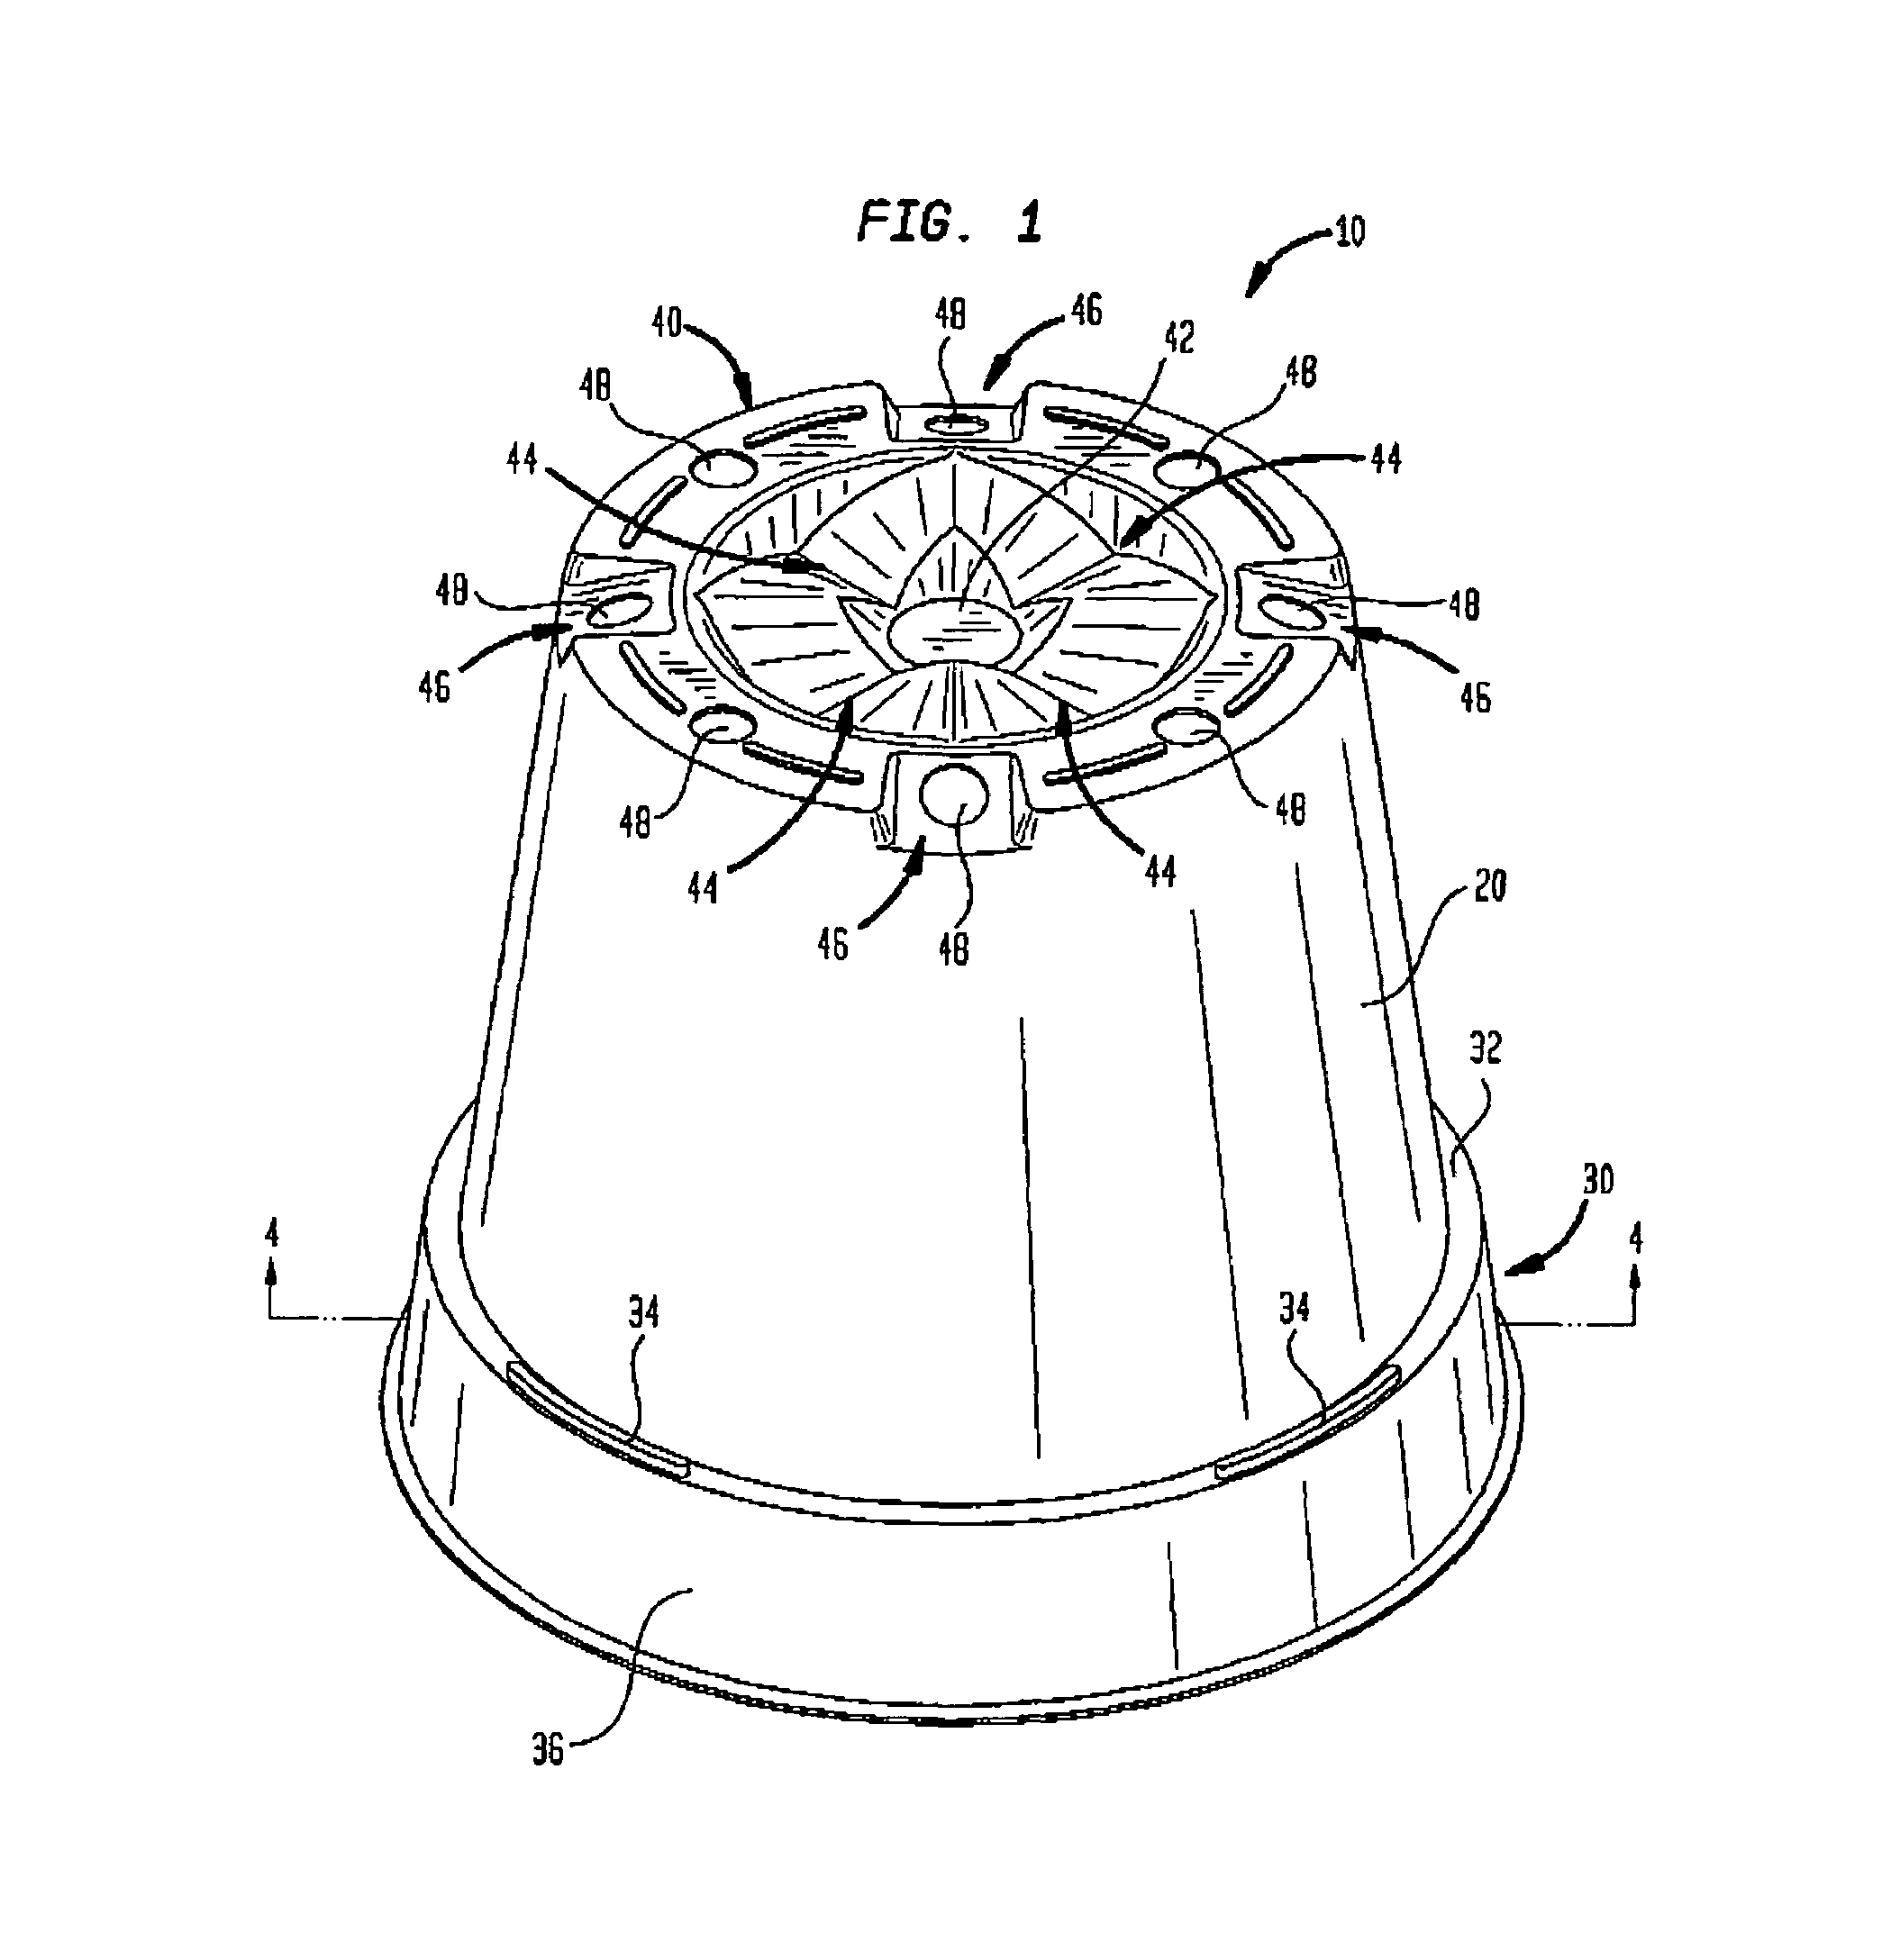 Planting pots and multi-compartment tray having self-orienting configuration